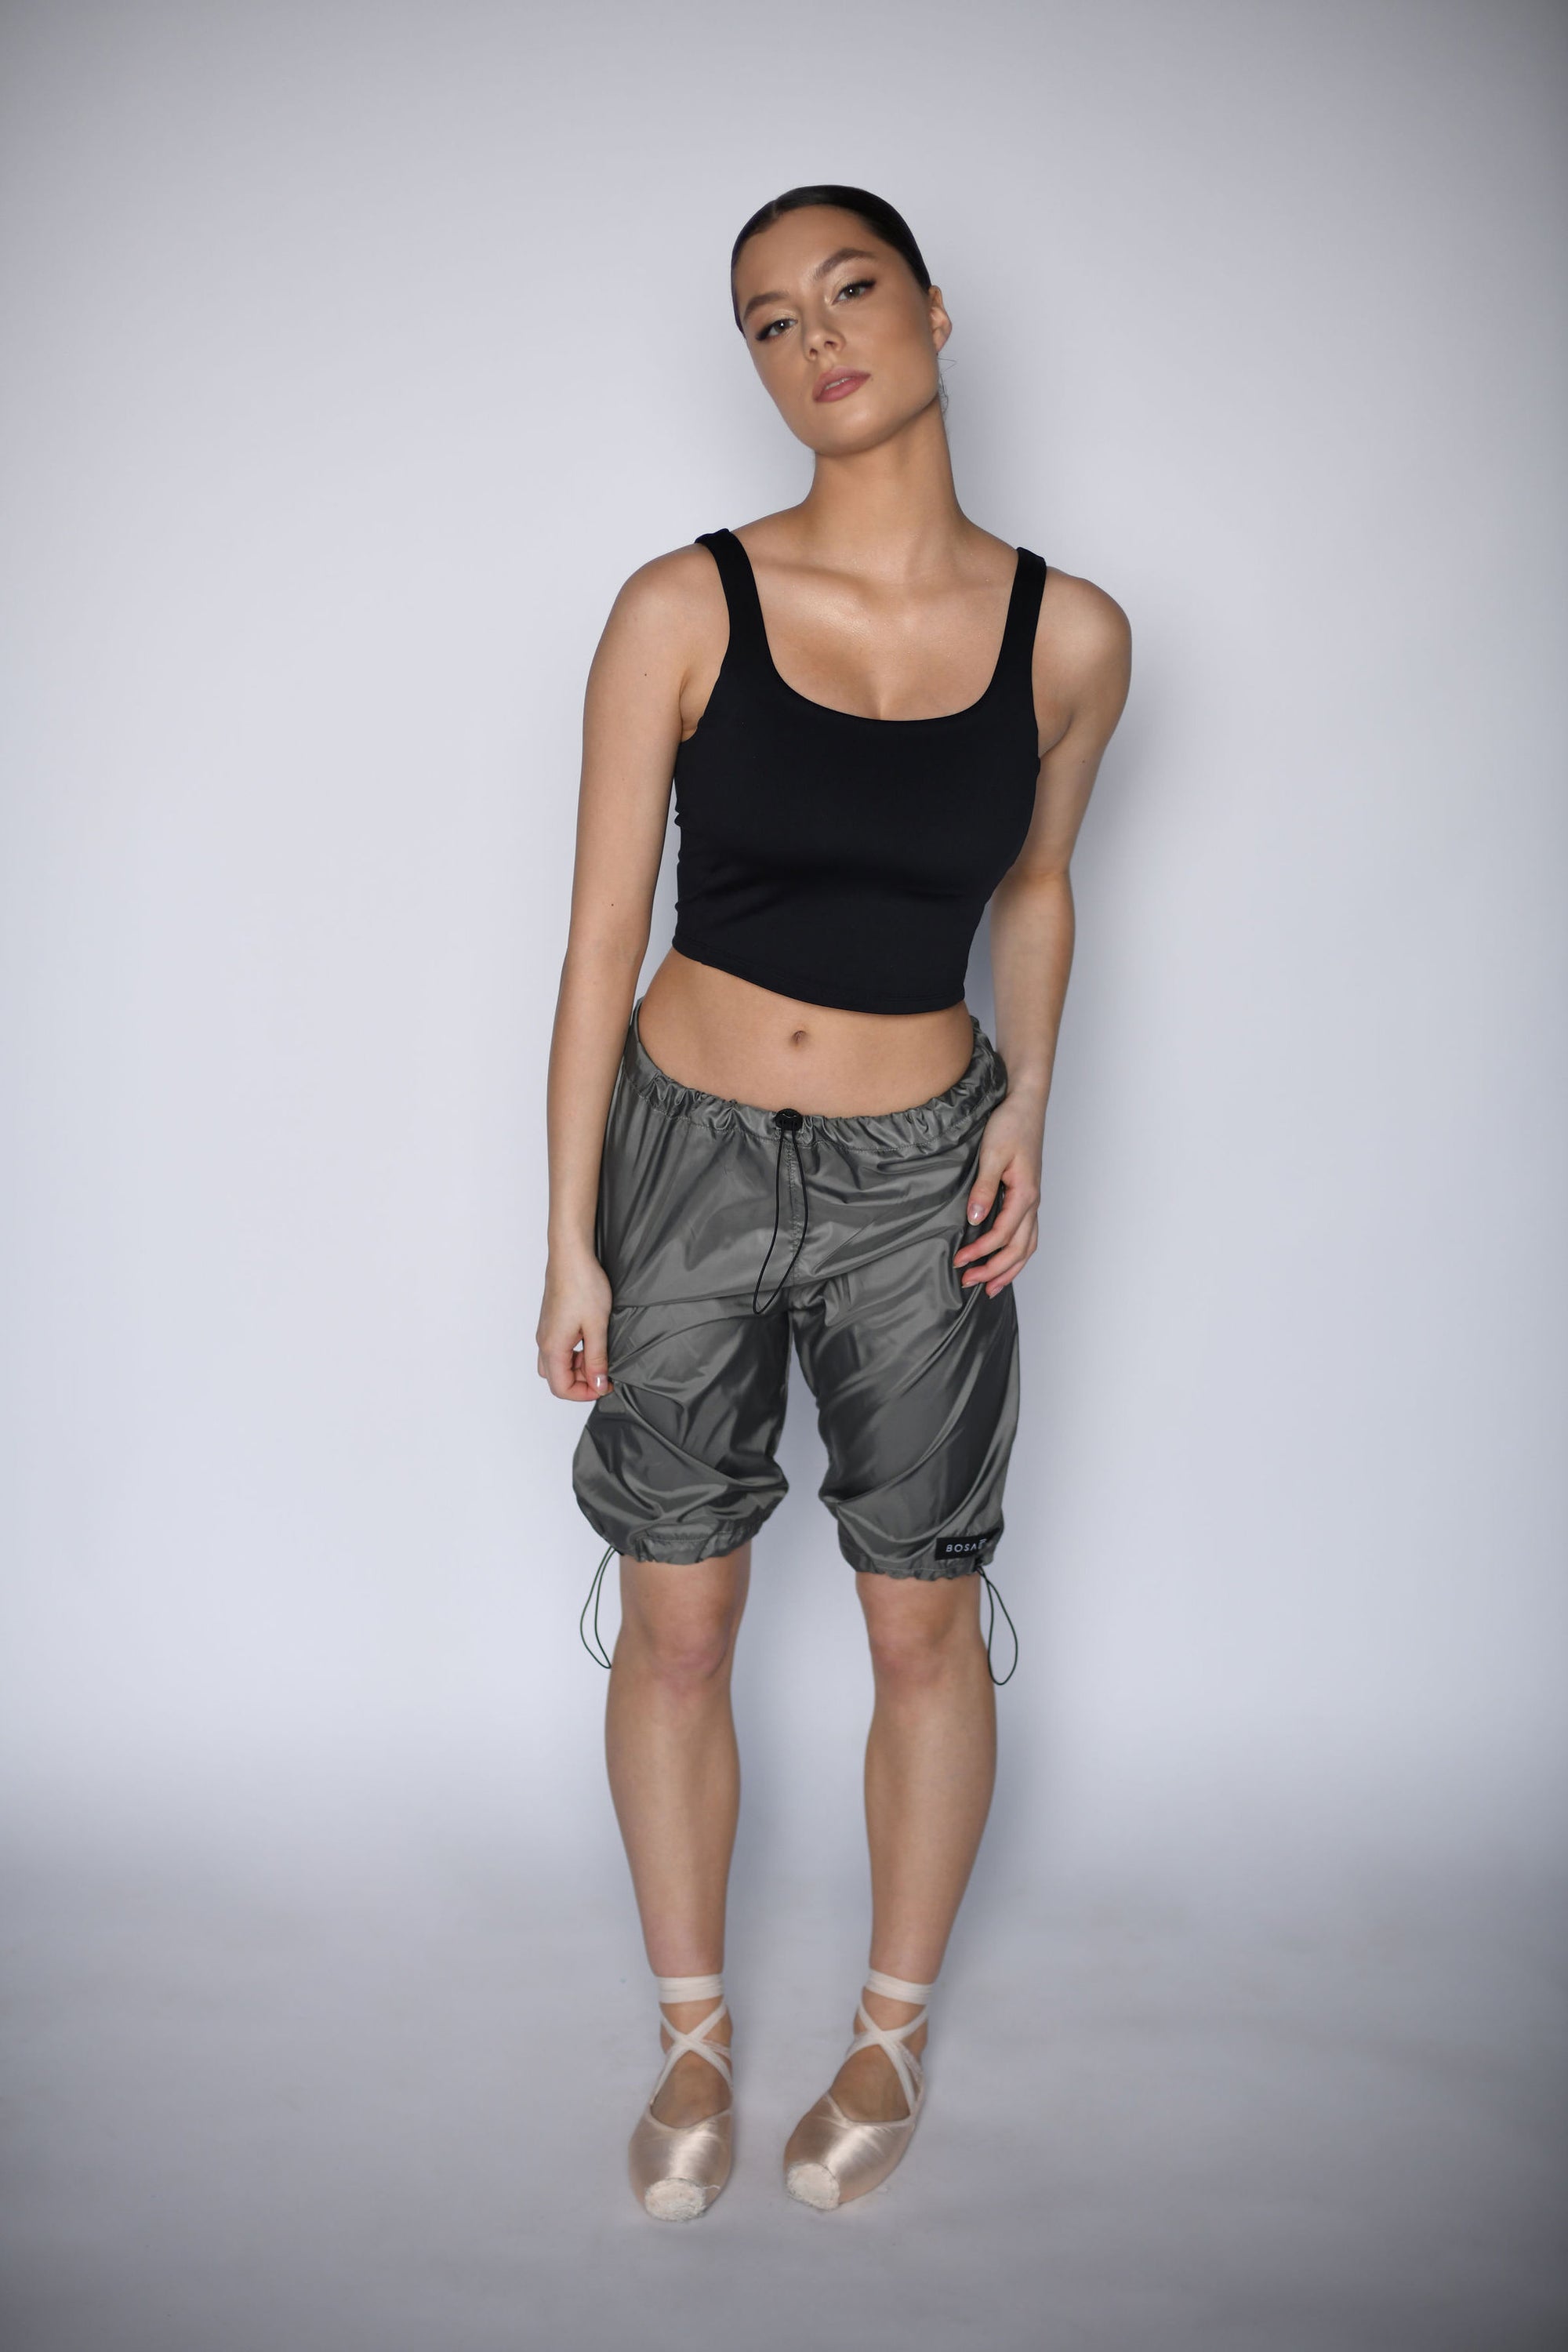 NEW URBAN SWAN COLLECTION S/S 23 | Dark concrete long shorts